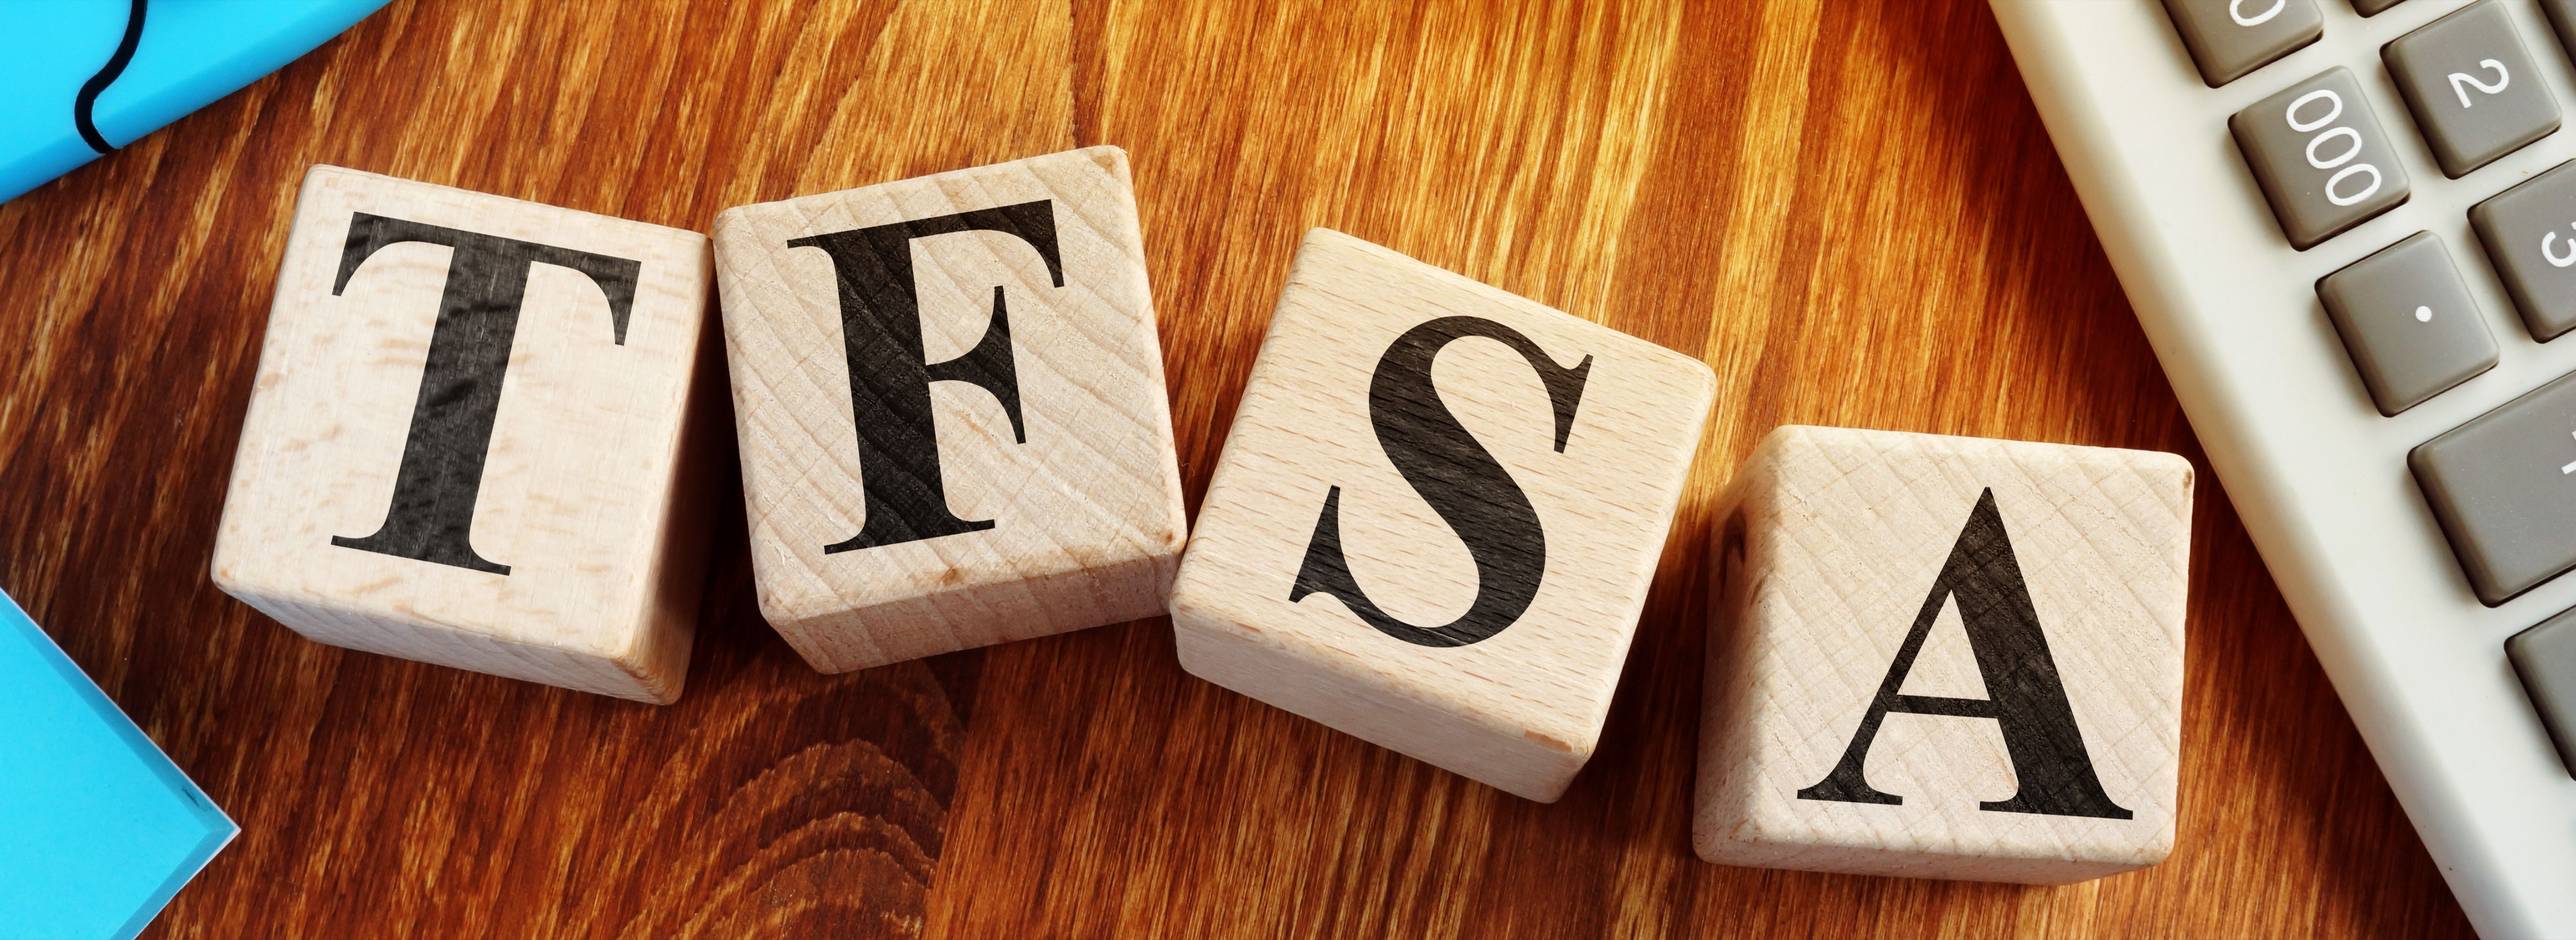 Tax Free Savings Account, TFSA spelled with wooden cubes